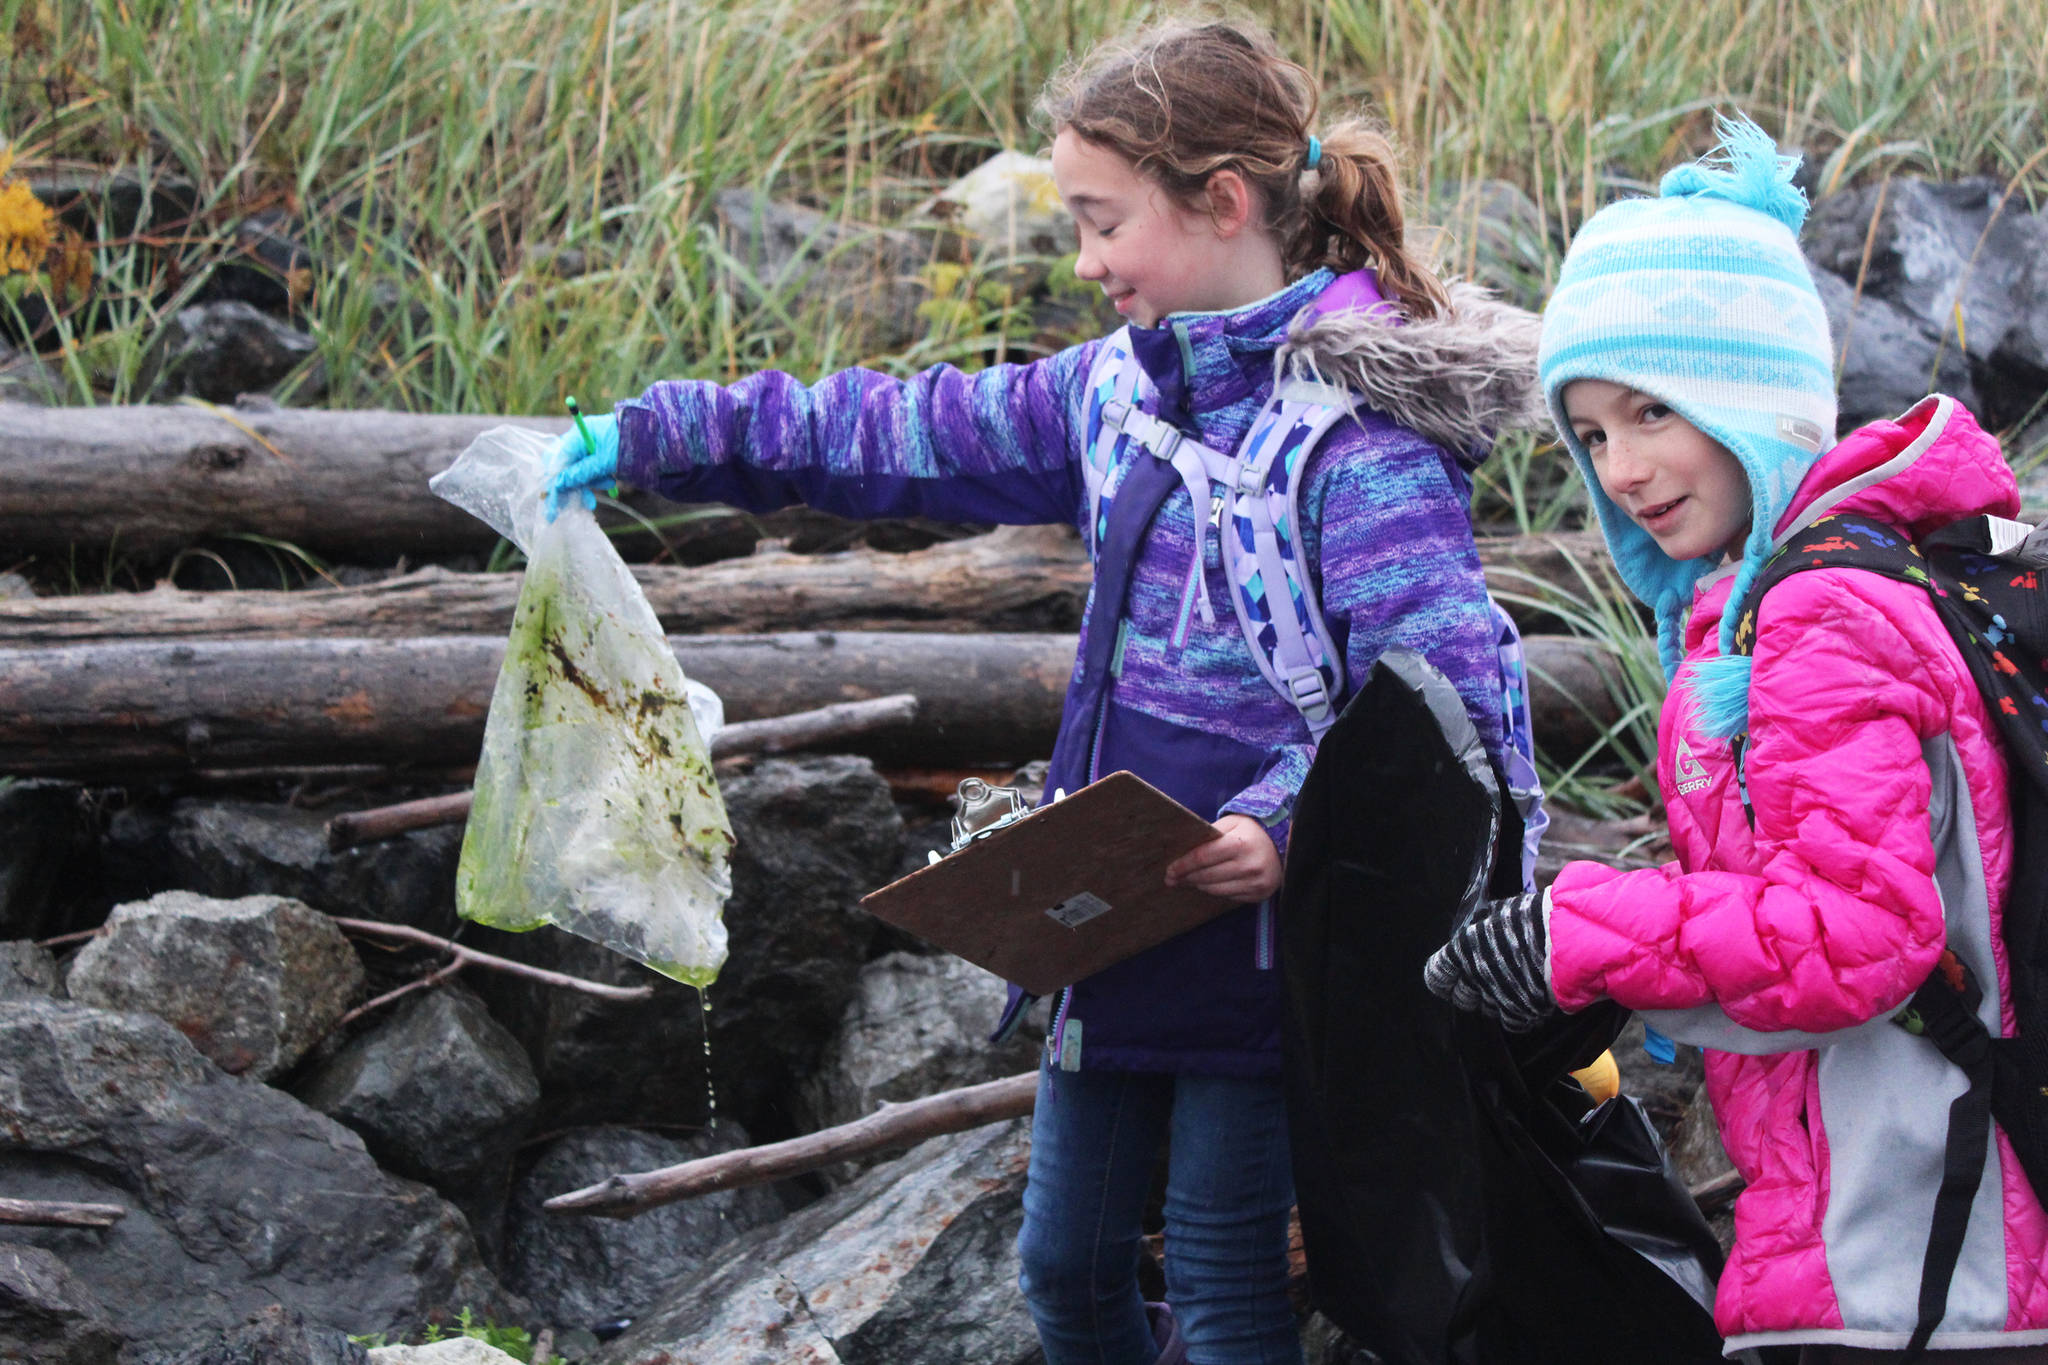 Hannah Baum (left) and Ellen Barrett (right) balk at a particularly gross piece of garbage they found Friday, Sept. 22, 2017 on a stretch of Kachemak Bay shoreline near Mariner Park in Homer, Alaska. They and their classmates from McNeil Canyon Elementary School participated in this year’s Kachemak Bay CoastWalk, in which groups can sign up to adopt a section of coast to clean of debris. (Photo by Megan Pacer/Homer News)